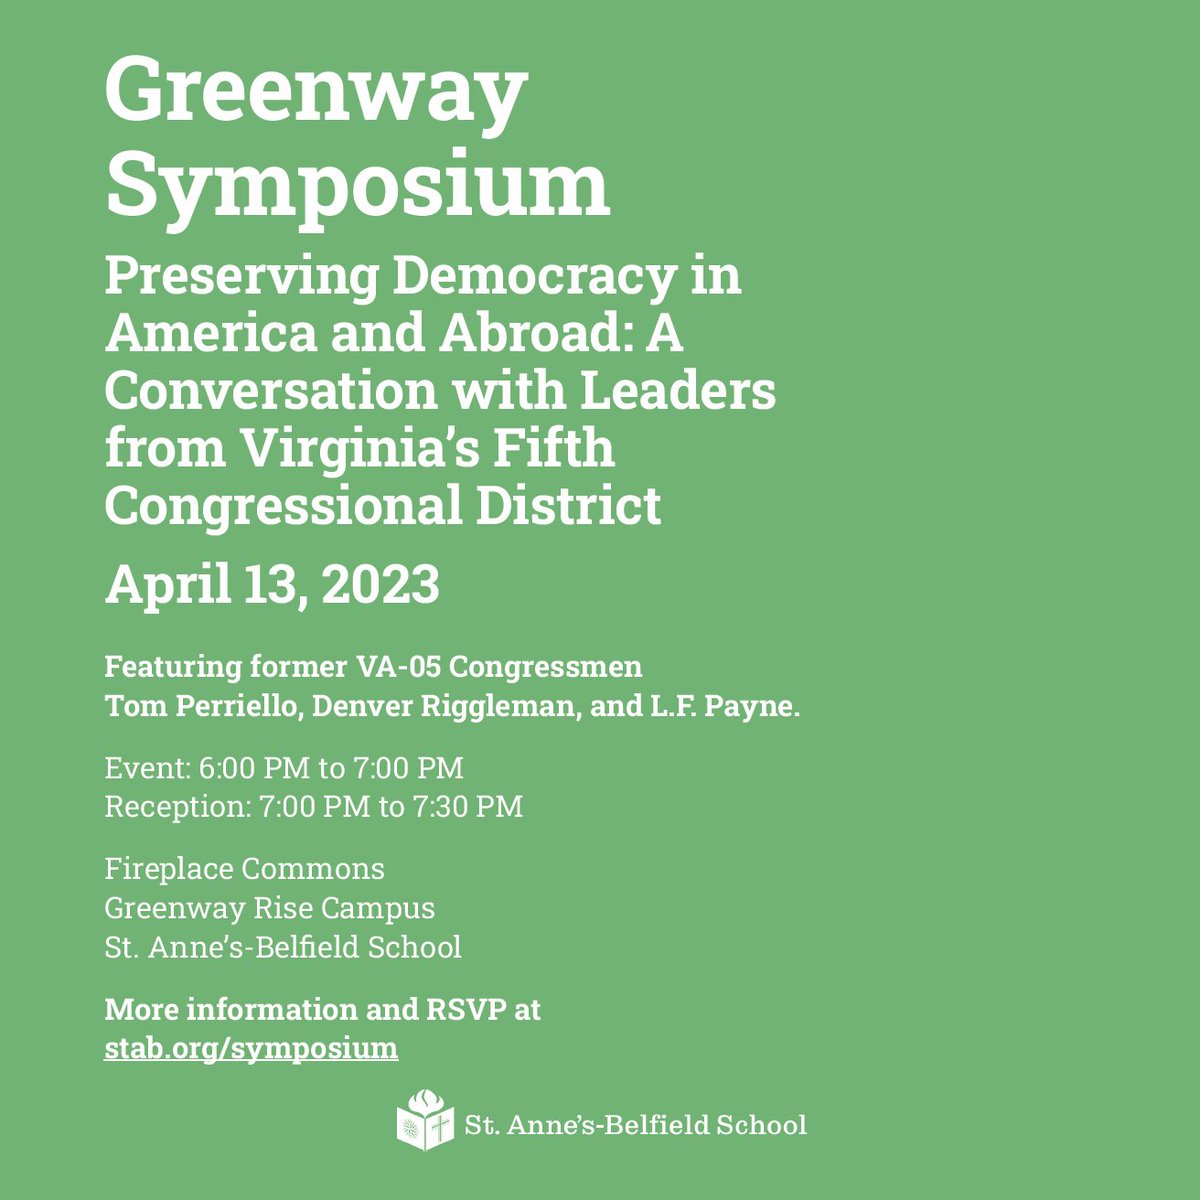 Greenway Symposium is back! Join us for a wonderful evening where we will be joined by three former congressmen: Tom Perriello (Class of 1992), Denver Riggleman, and L.F. Payne, to discuss preserving democracy in America. RSVP: ow.ly/tBFq50NF4Sy